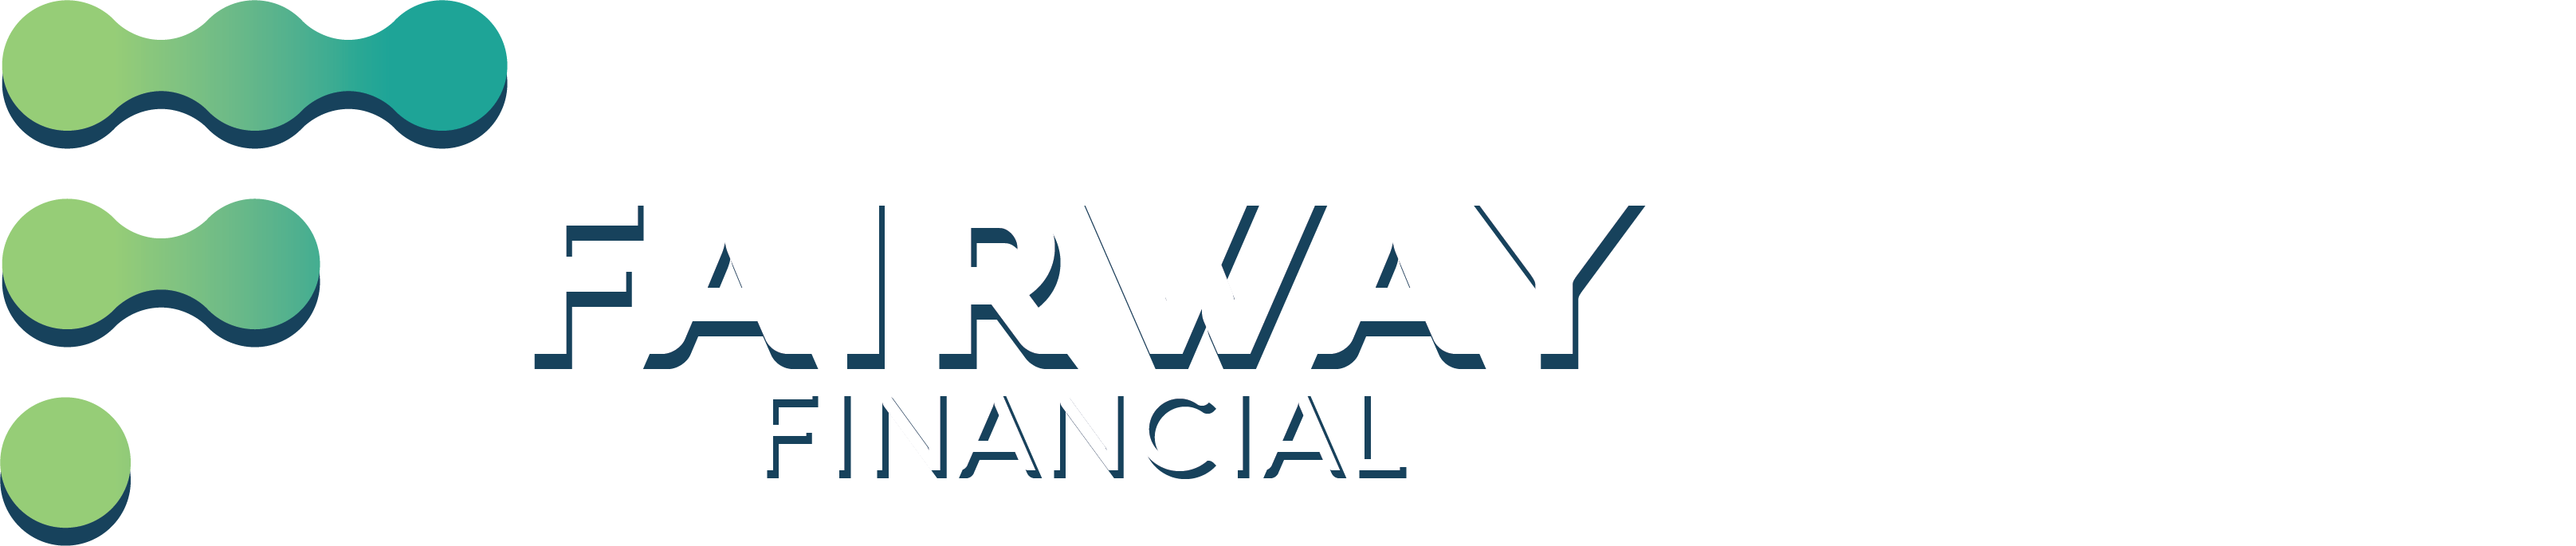 Fairway Financial - helpingn customers grow their credit by establishing a consistent pay history